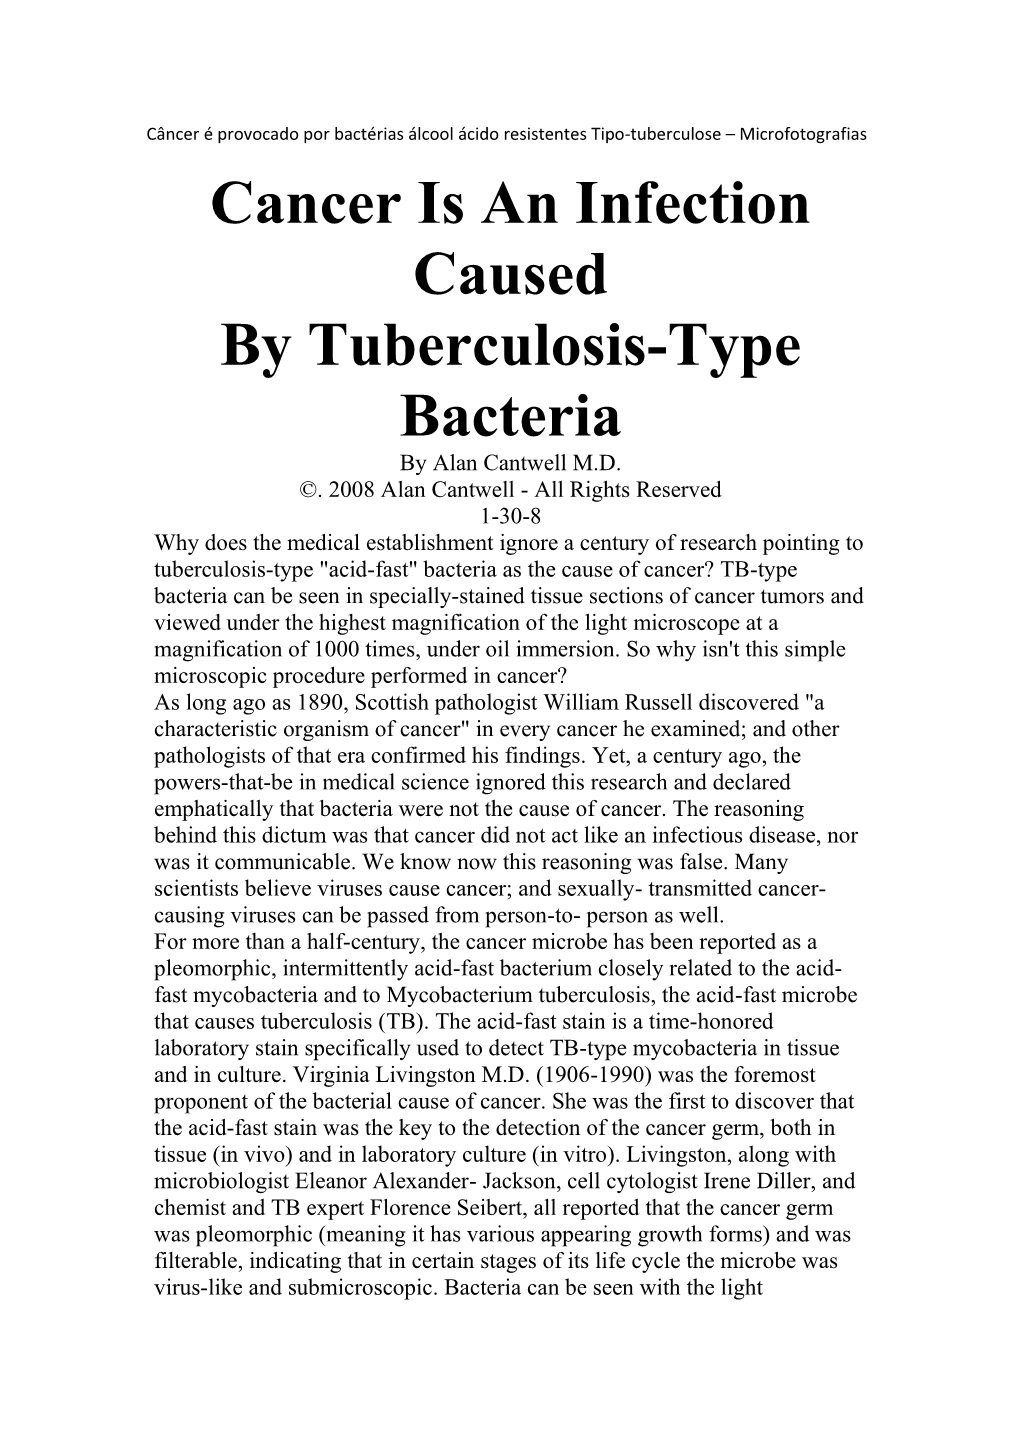 Cancer Is an Infection Caused by Tuberculosis-Type Bacteria